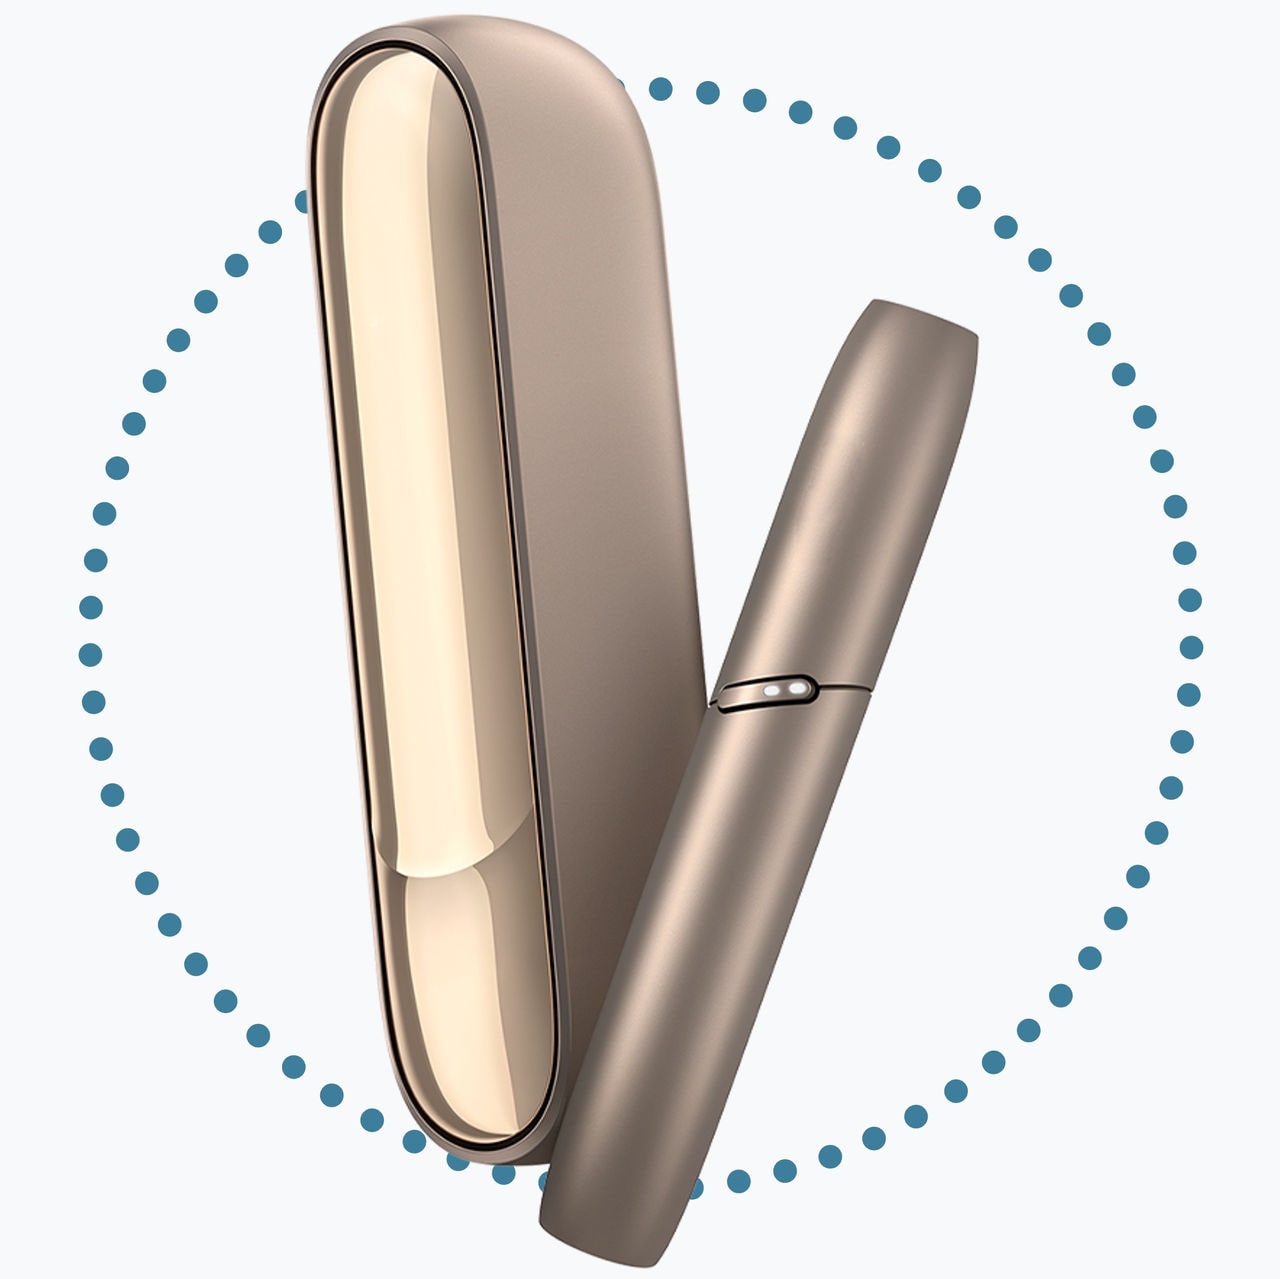 Internal resistive heating using a blade: tobacco heating system (THS), also known commercially as IQOS Originals.